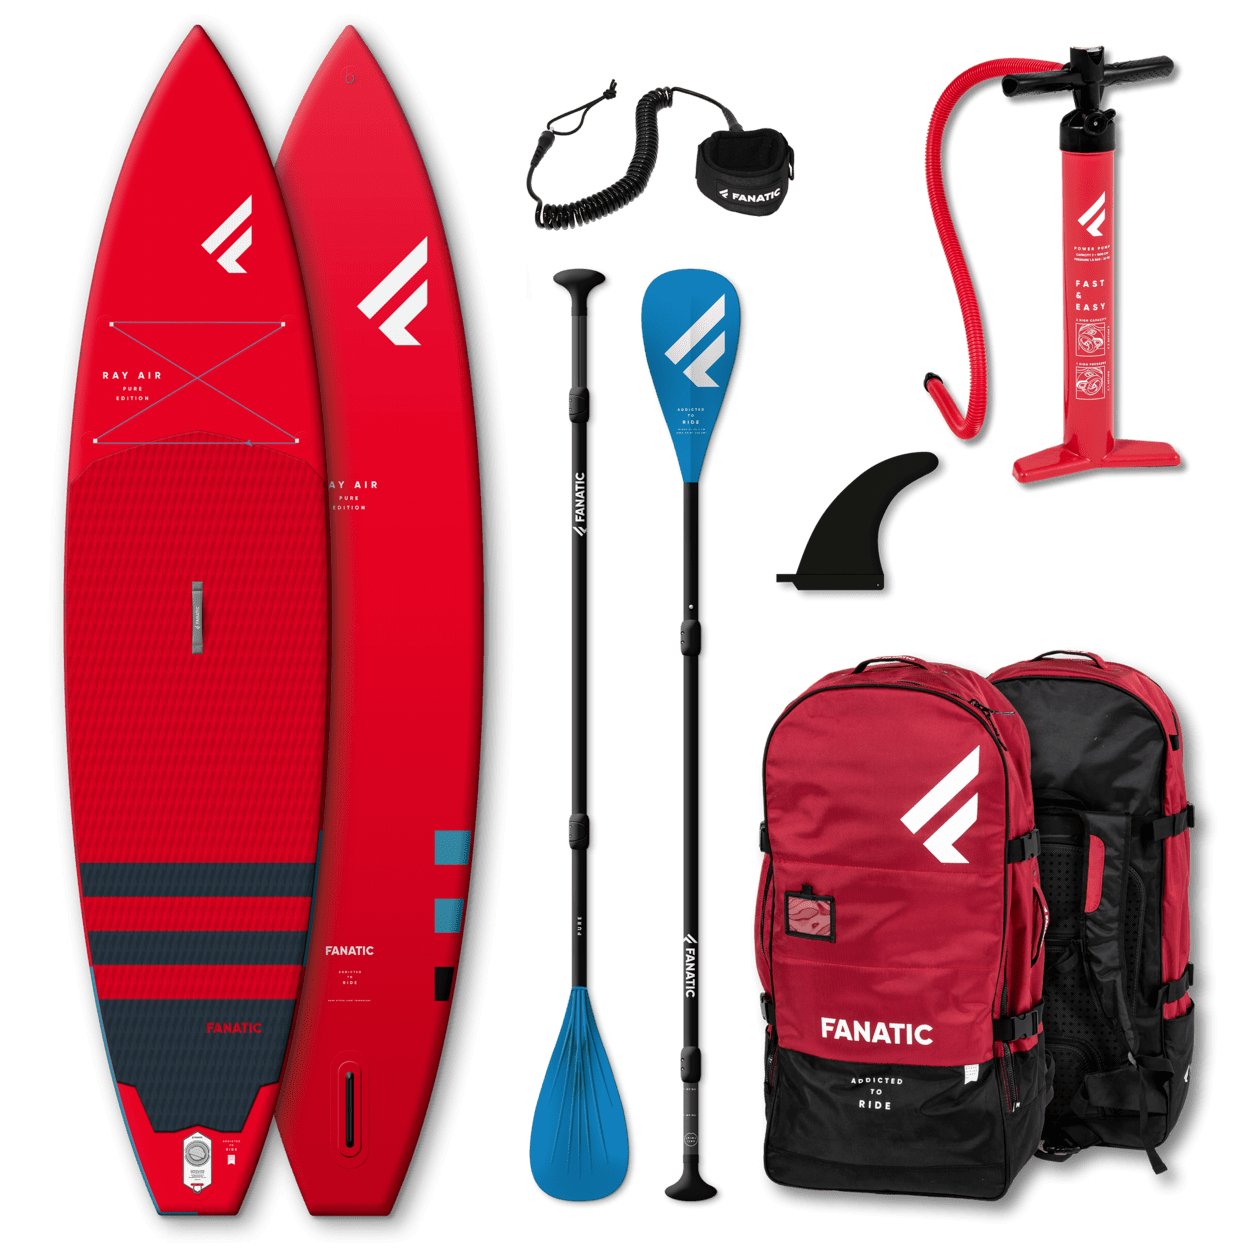 Fanatic Package Ray Air/Pure 2022 iSUP Paddleboard - Worthing Watersports - 9010583015743 - iSUP Packages - Fanatic SUP